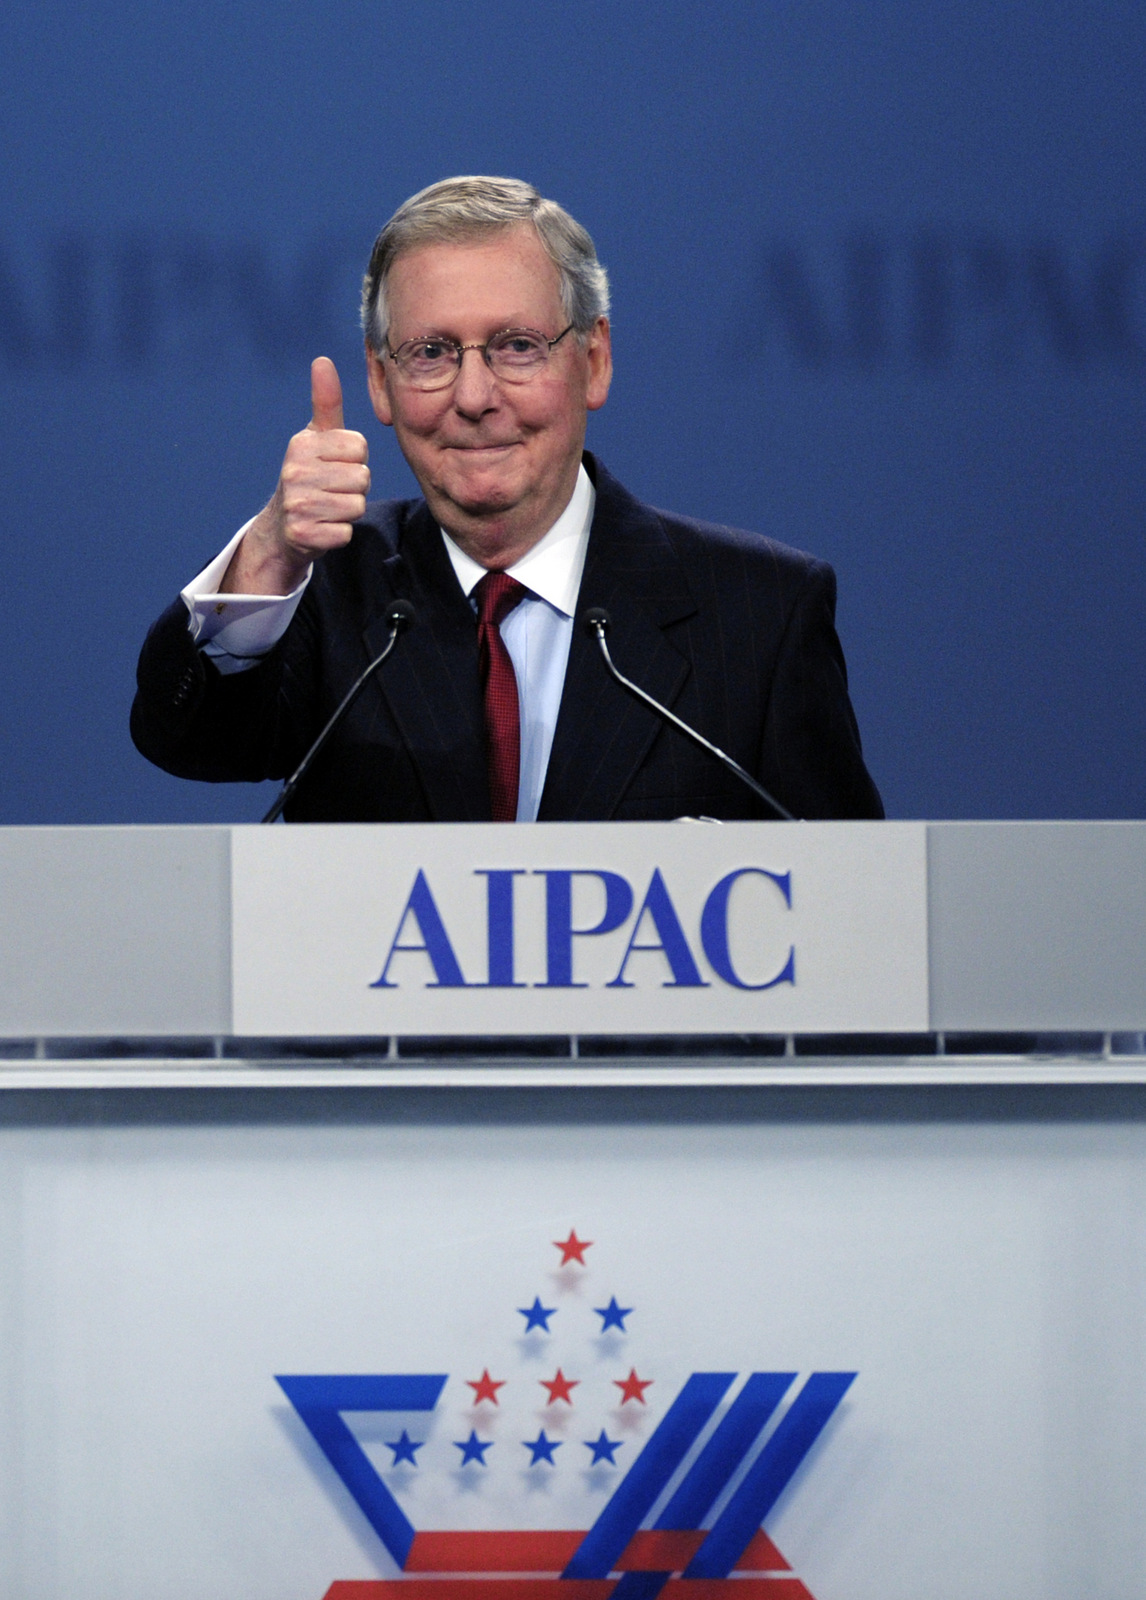 Senate Minority Leader Mitch McConnell, R-Ky., gives a thumbs-up as he finishes his address to the American Israel Public Affairs Committee (AIPAC) Policy Conference opening plenary session in Washington, Monday, March 5, 2012. (AP Photo/Cliff Owen)